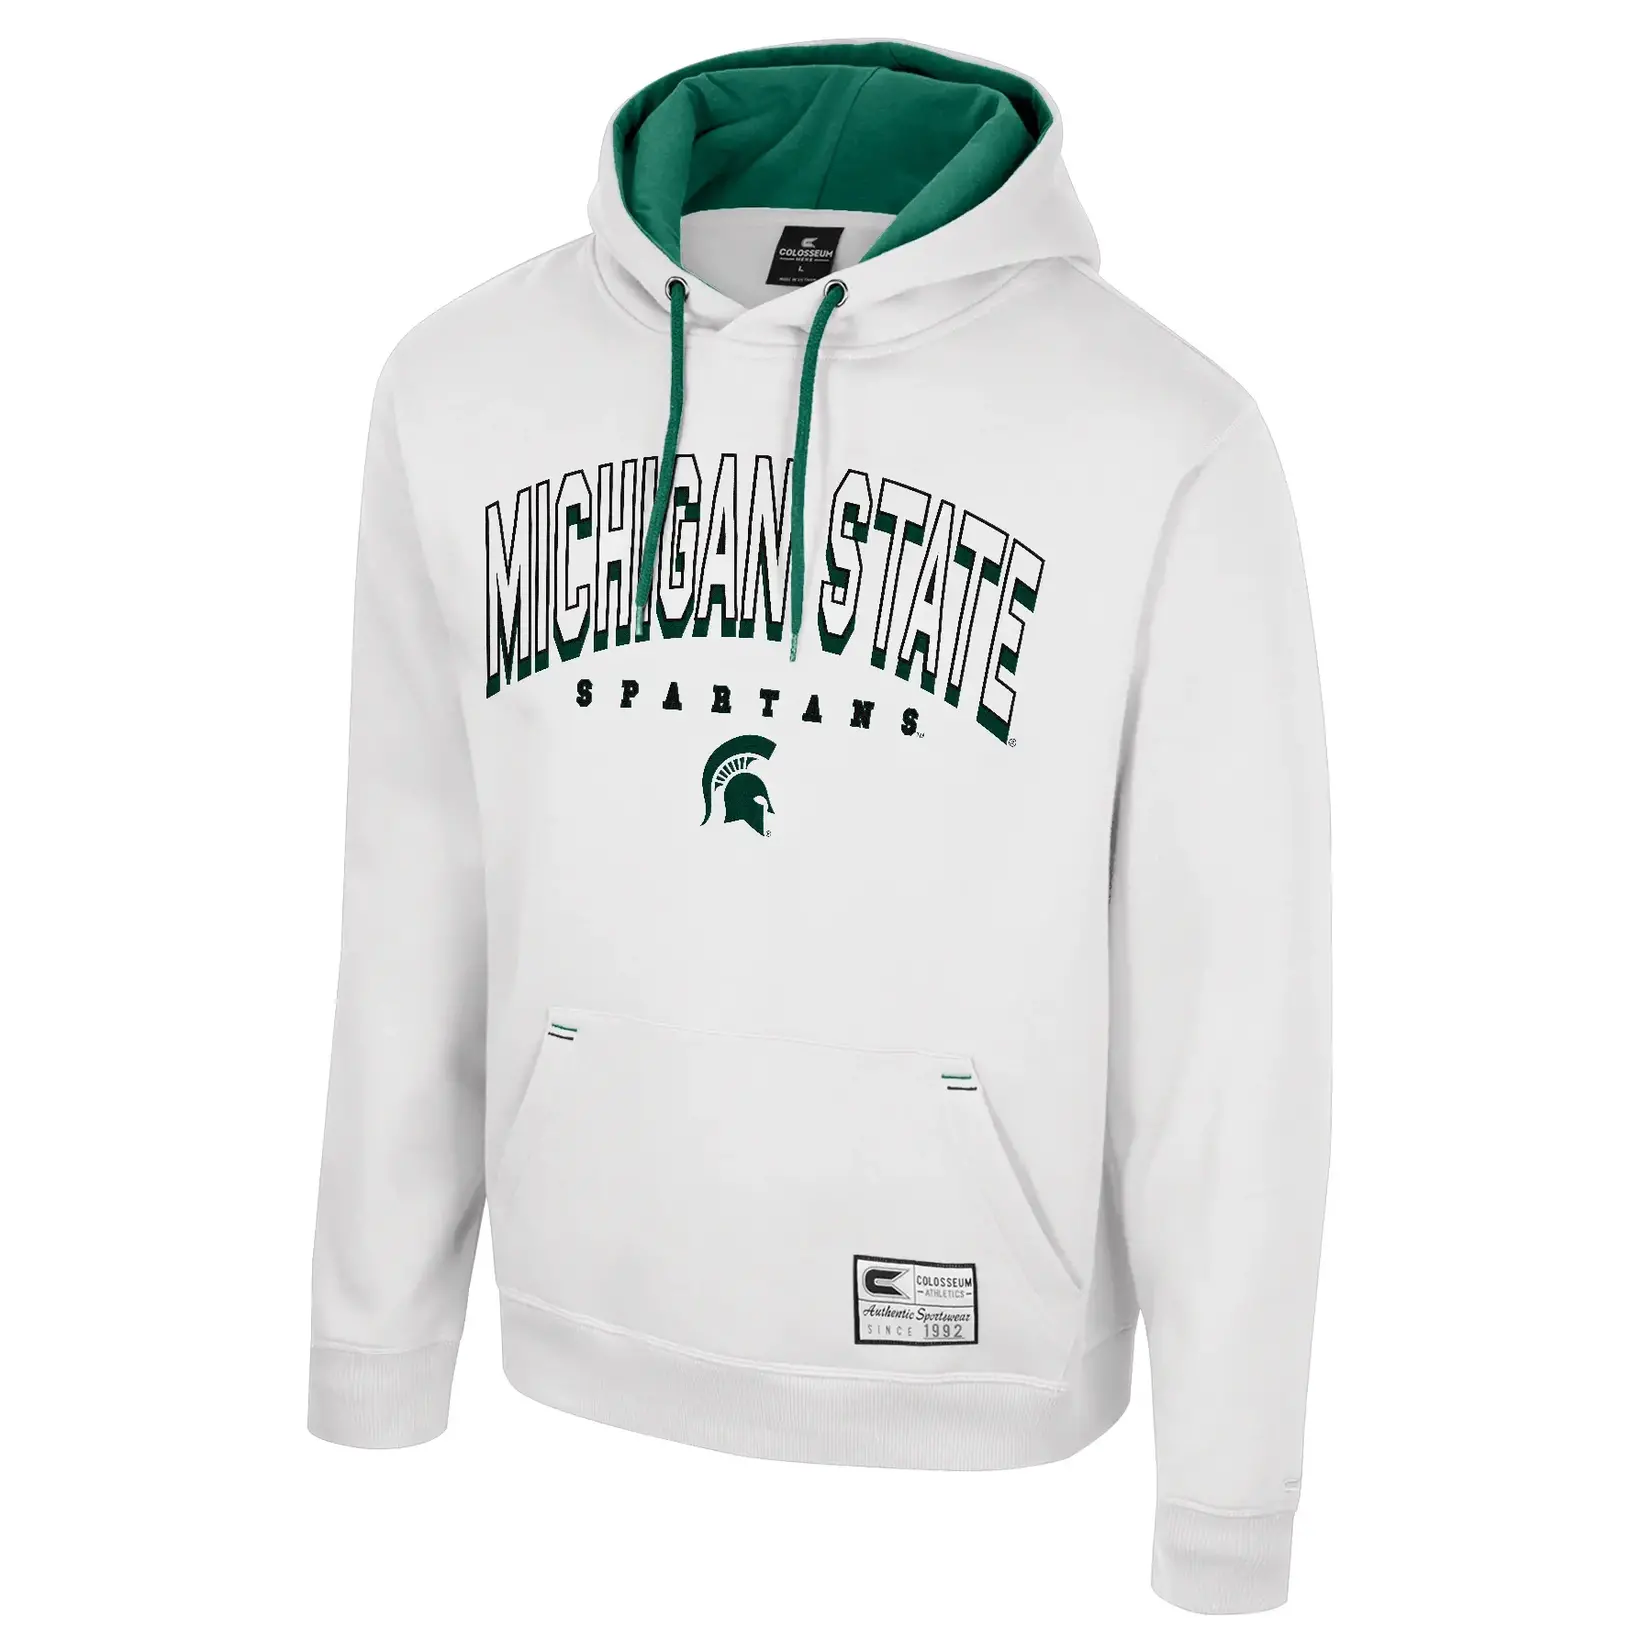 Colosseum Athletics NCAA Michigan State University Men's Ill be back second Hoodie